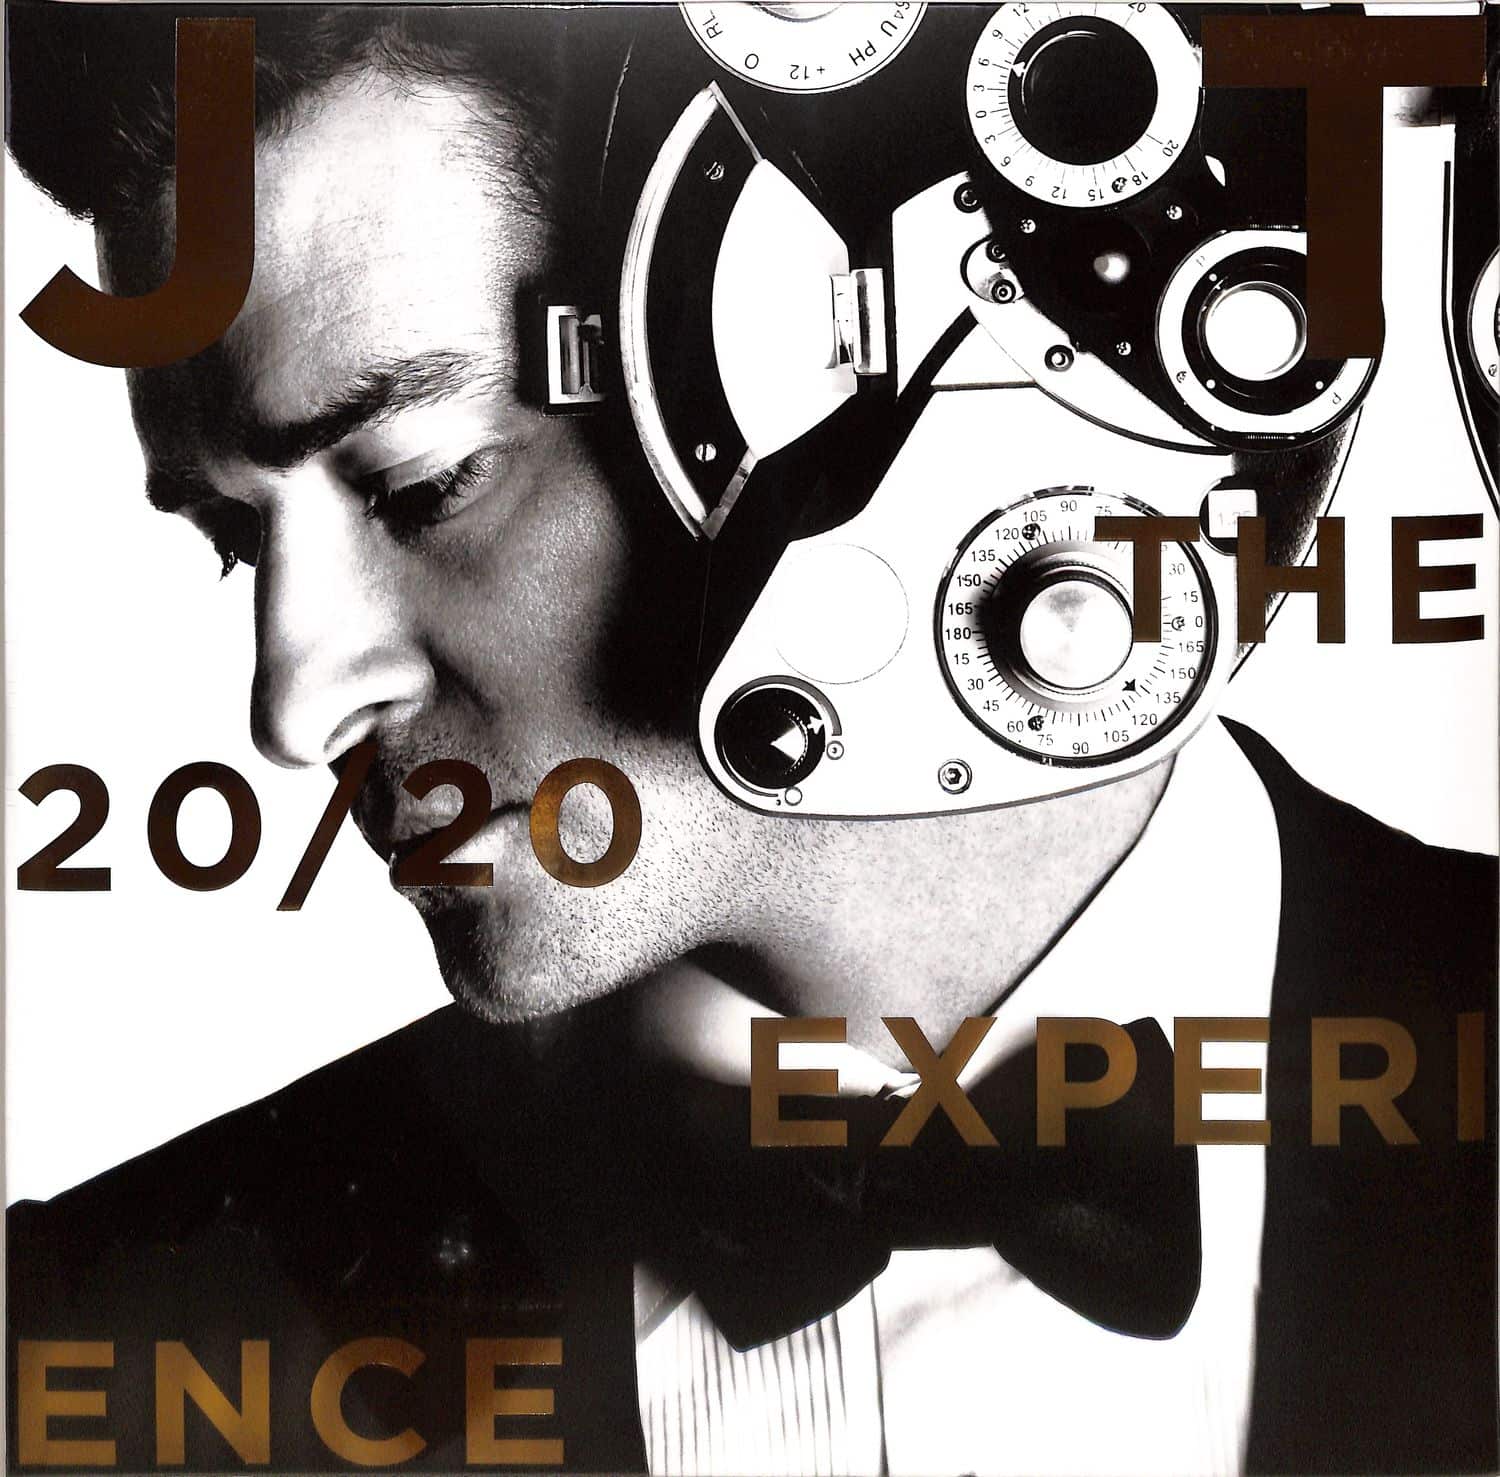 Justin Timberlake - THE 20/20 EXPERIENCE 1 OF 2 